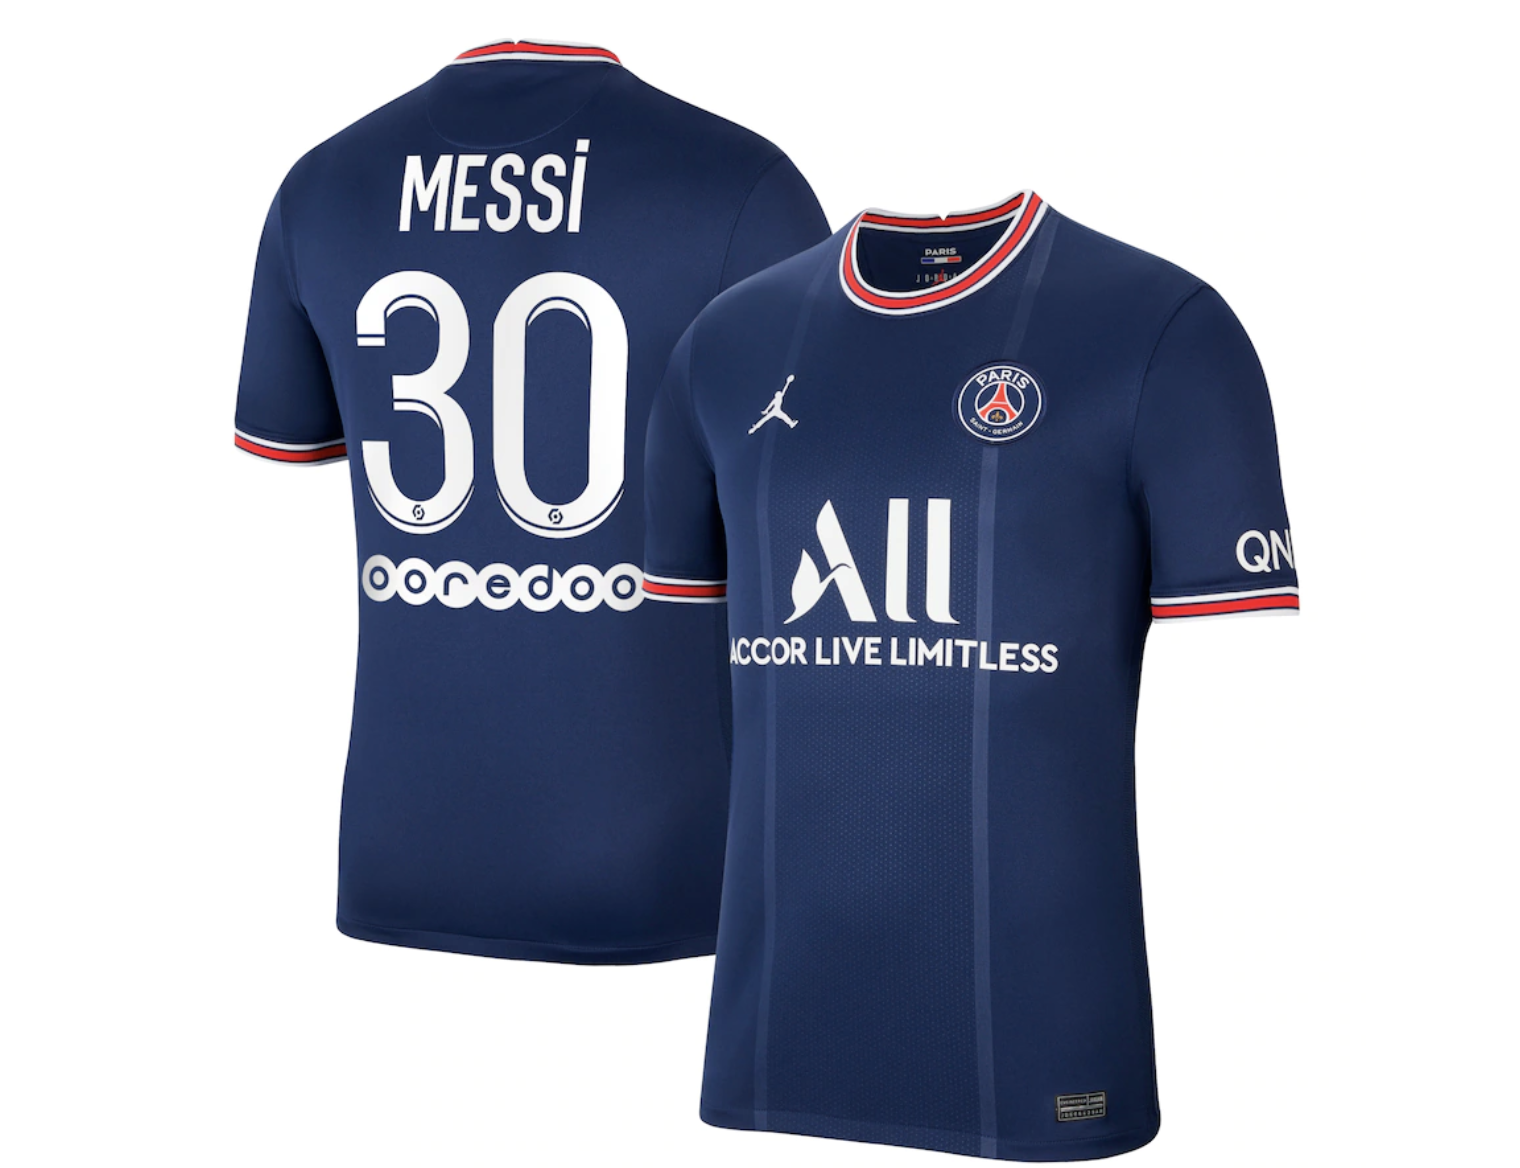 messi current jersey